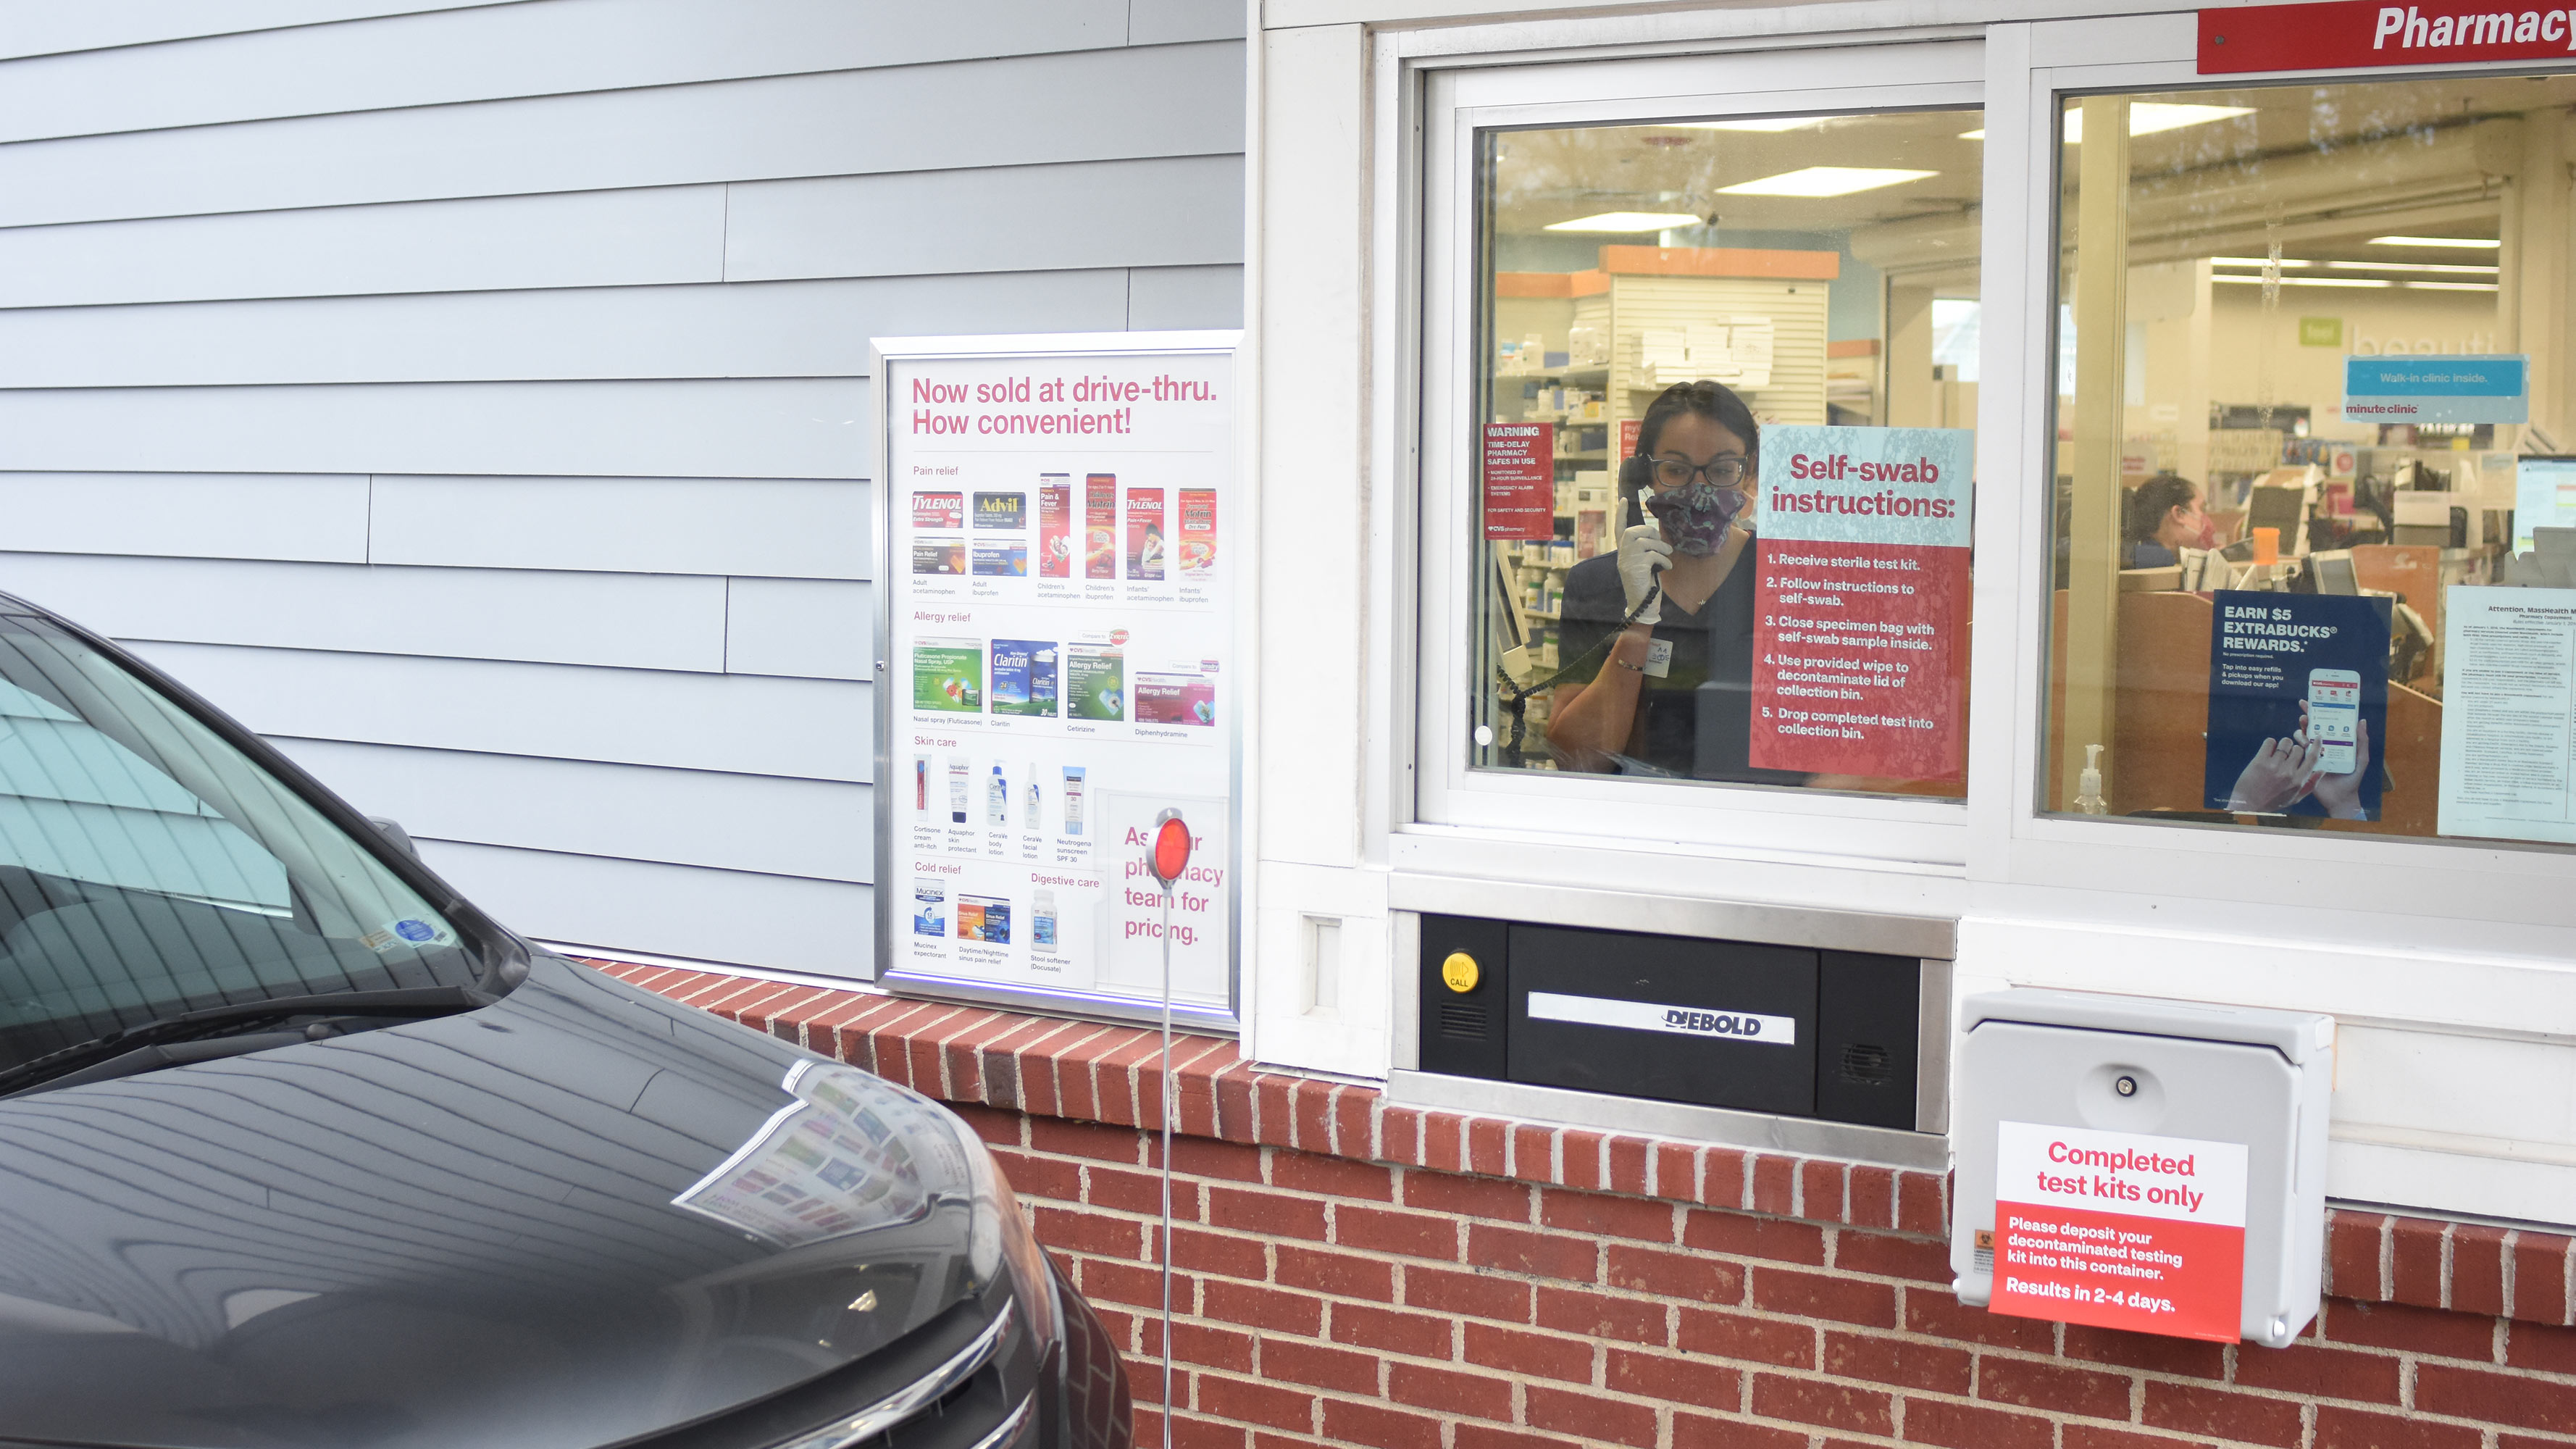 A CVS pharmacists speaks to a customer in the drive-thru at a CVS Pharmacy location.